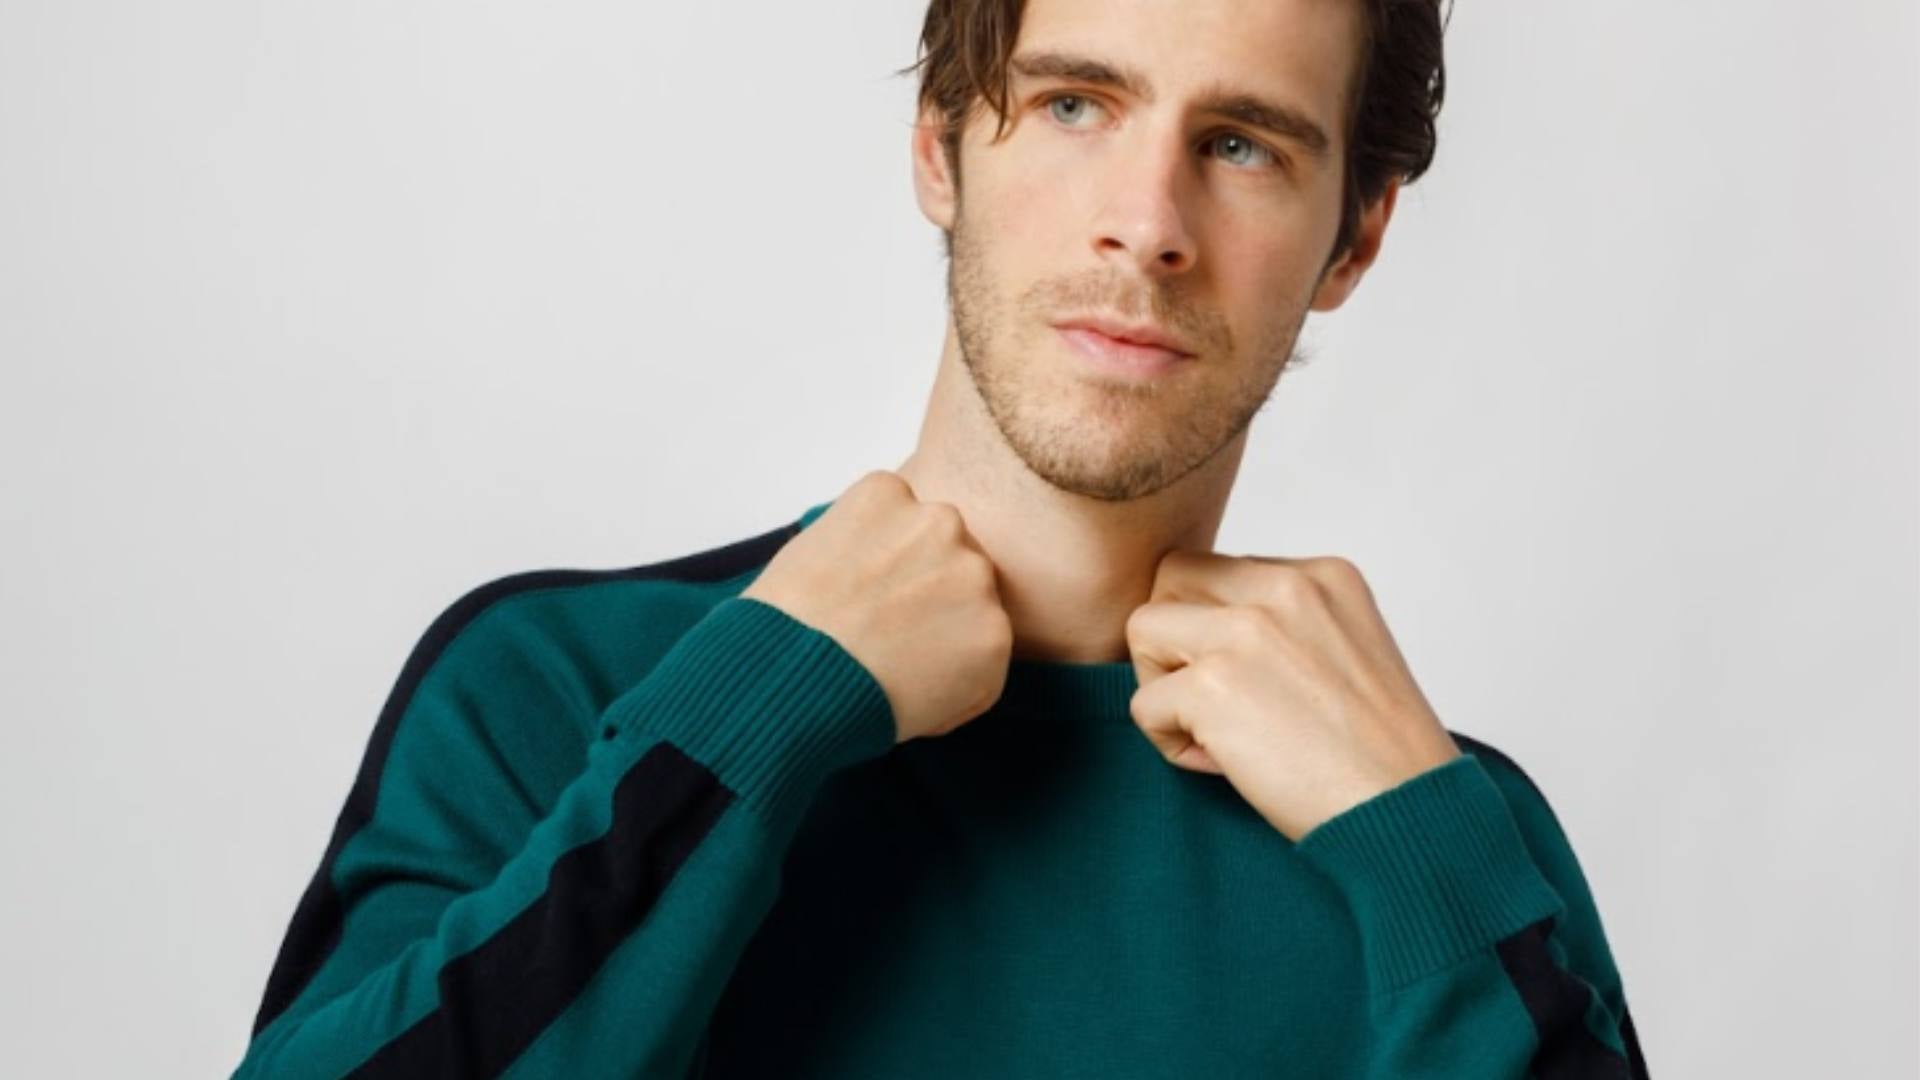 A man stands wearing a green and black shirt, demonstrating eco friendly fashion tips for spring.